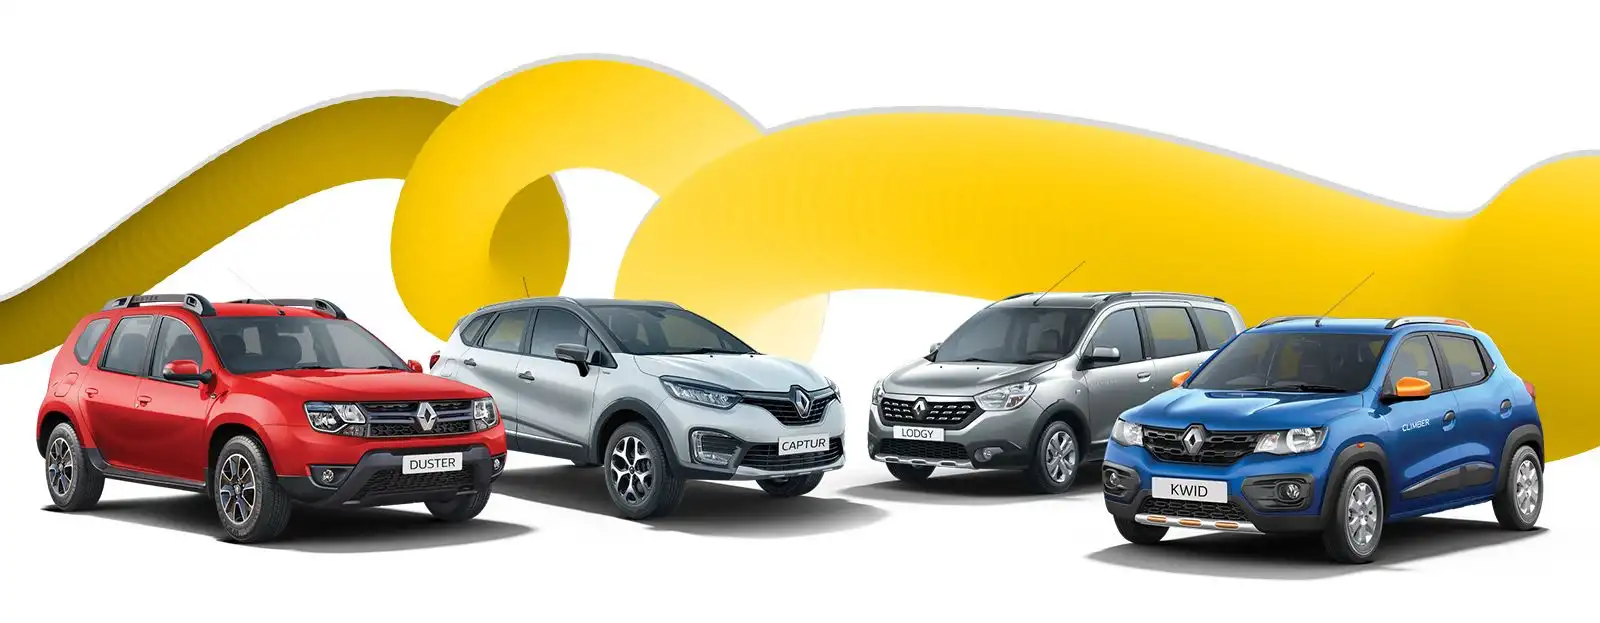 Choosing the Renault that bests suits your needs